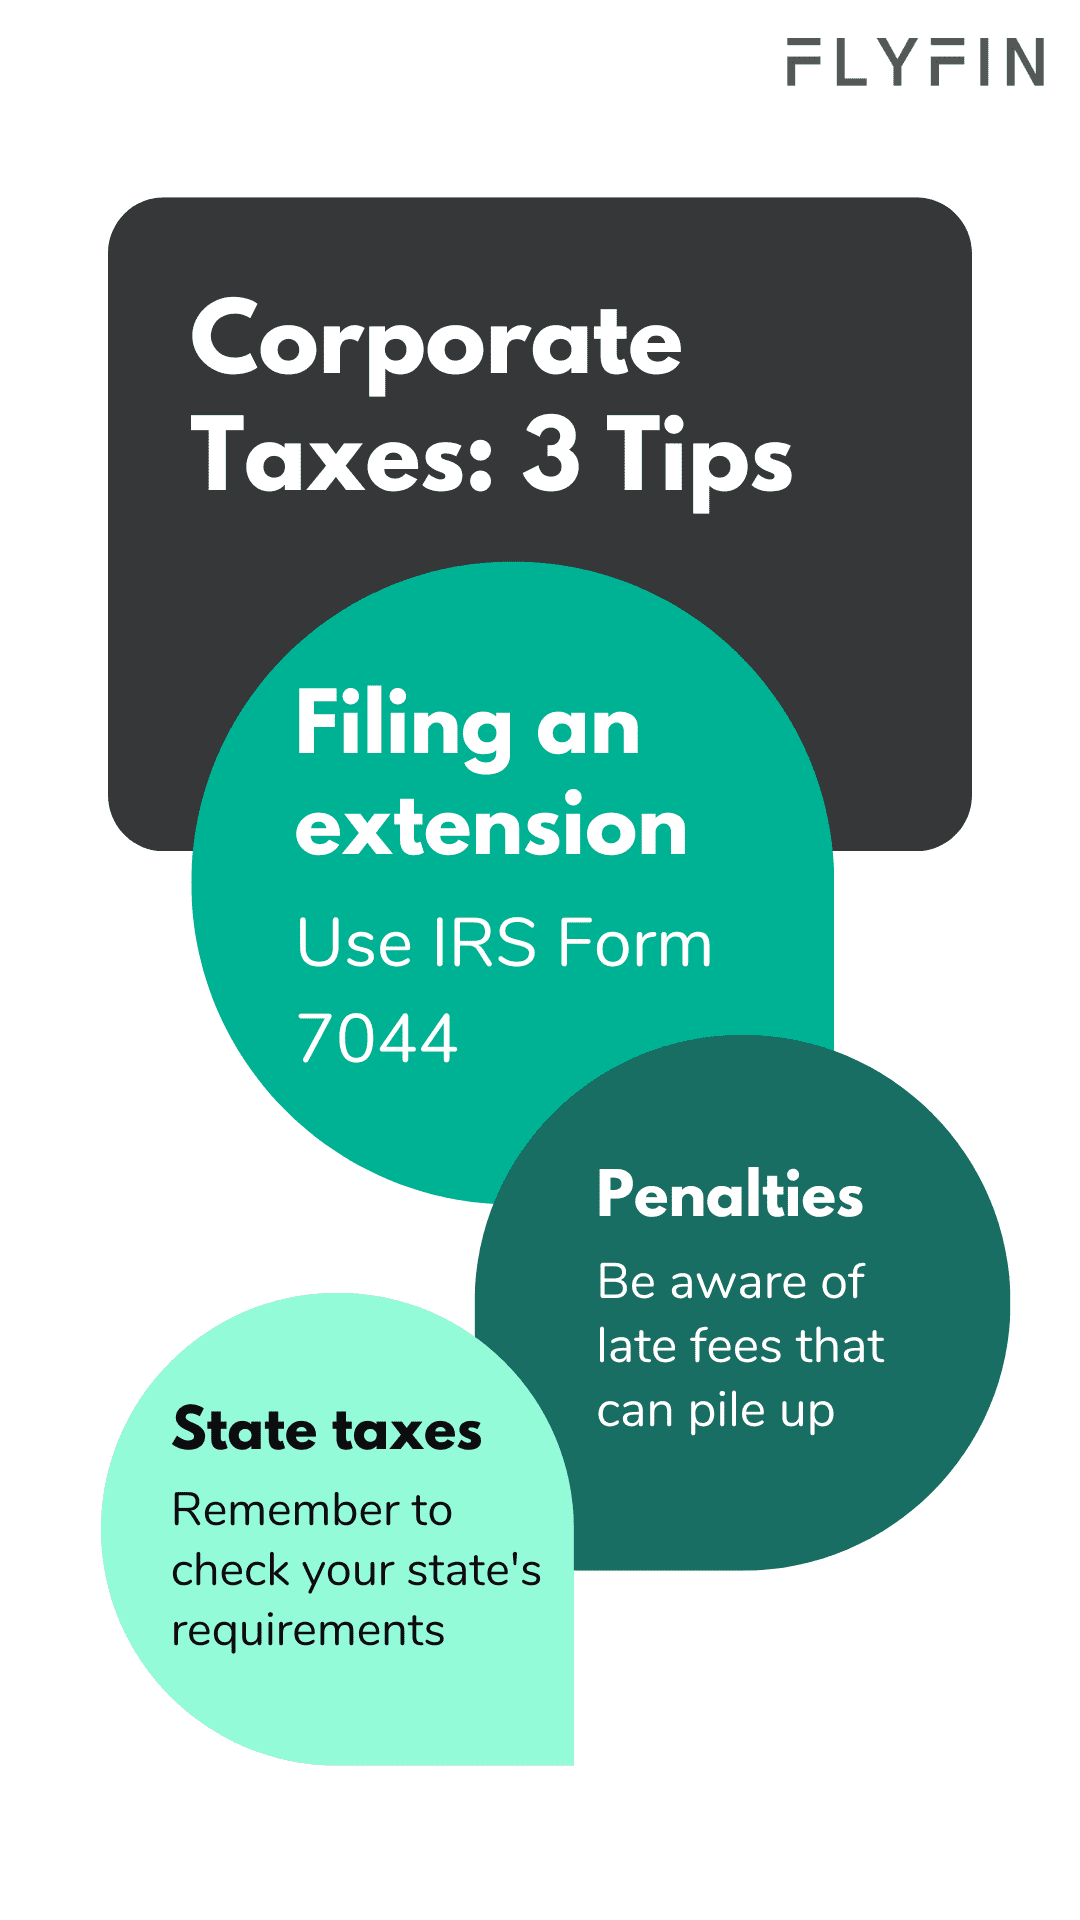 Additional tax considerations for incorporated entities